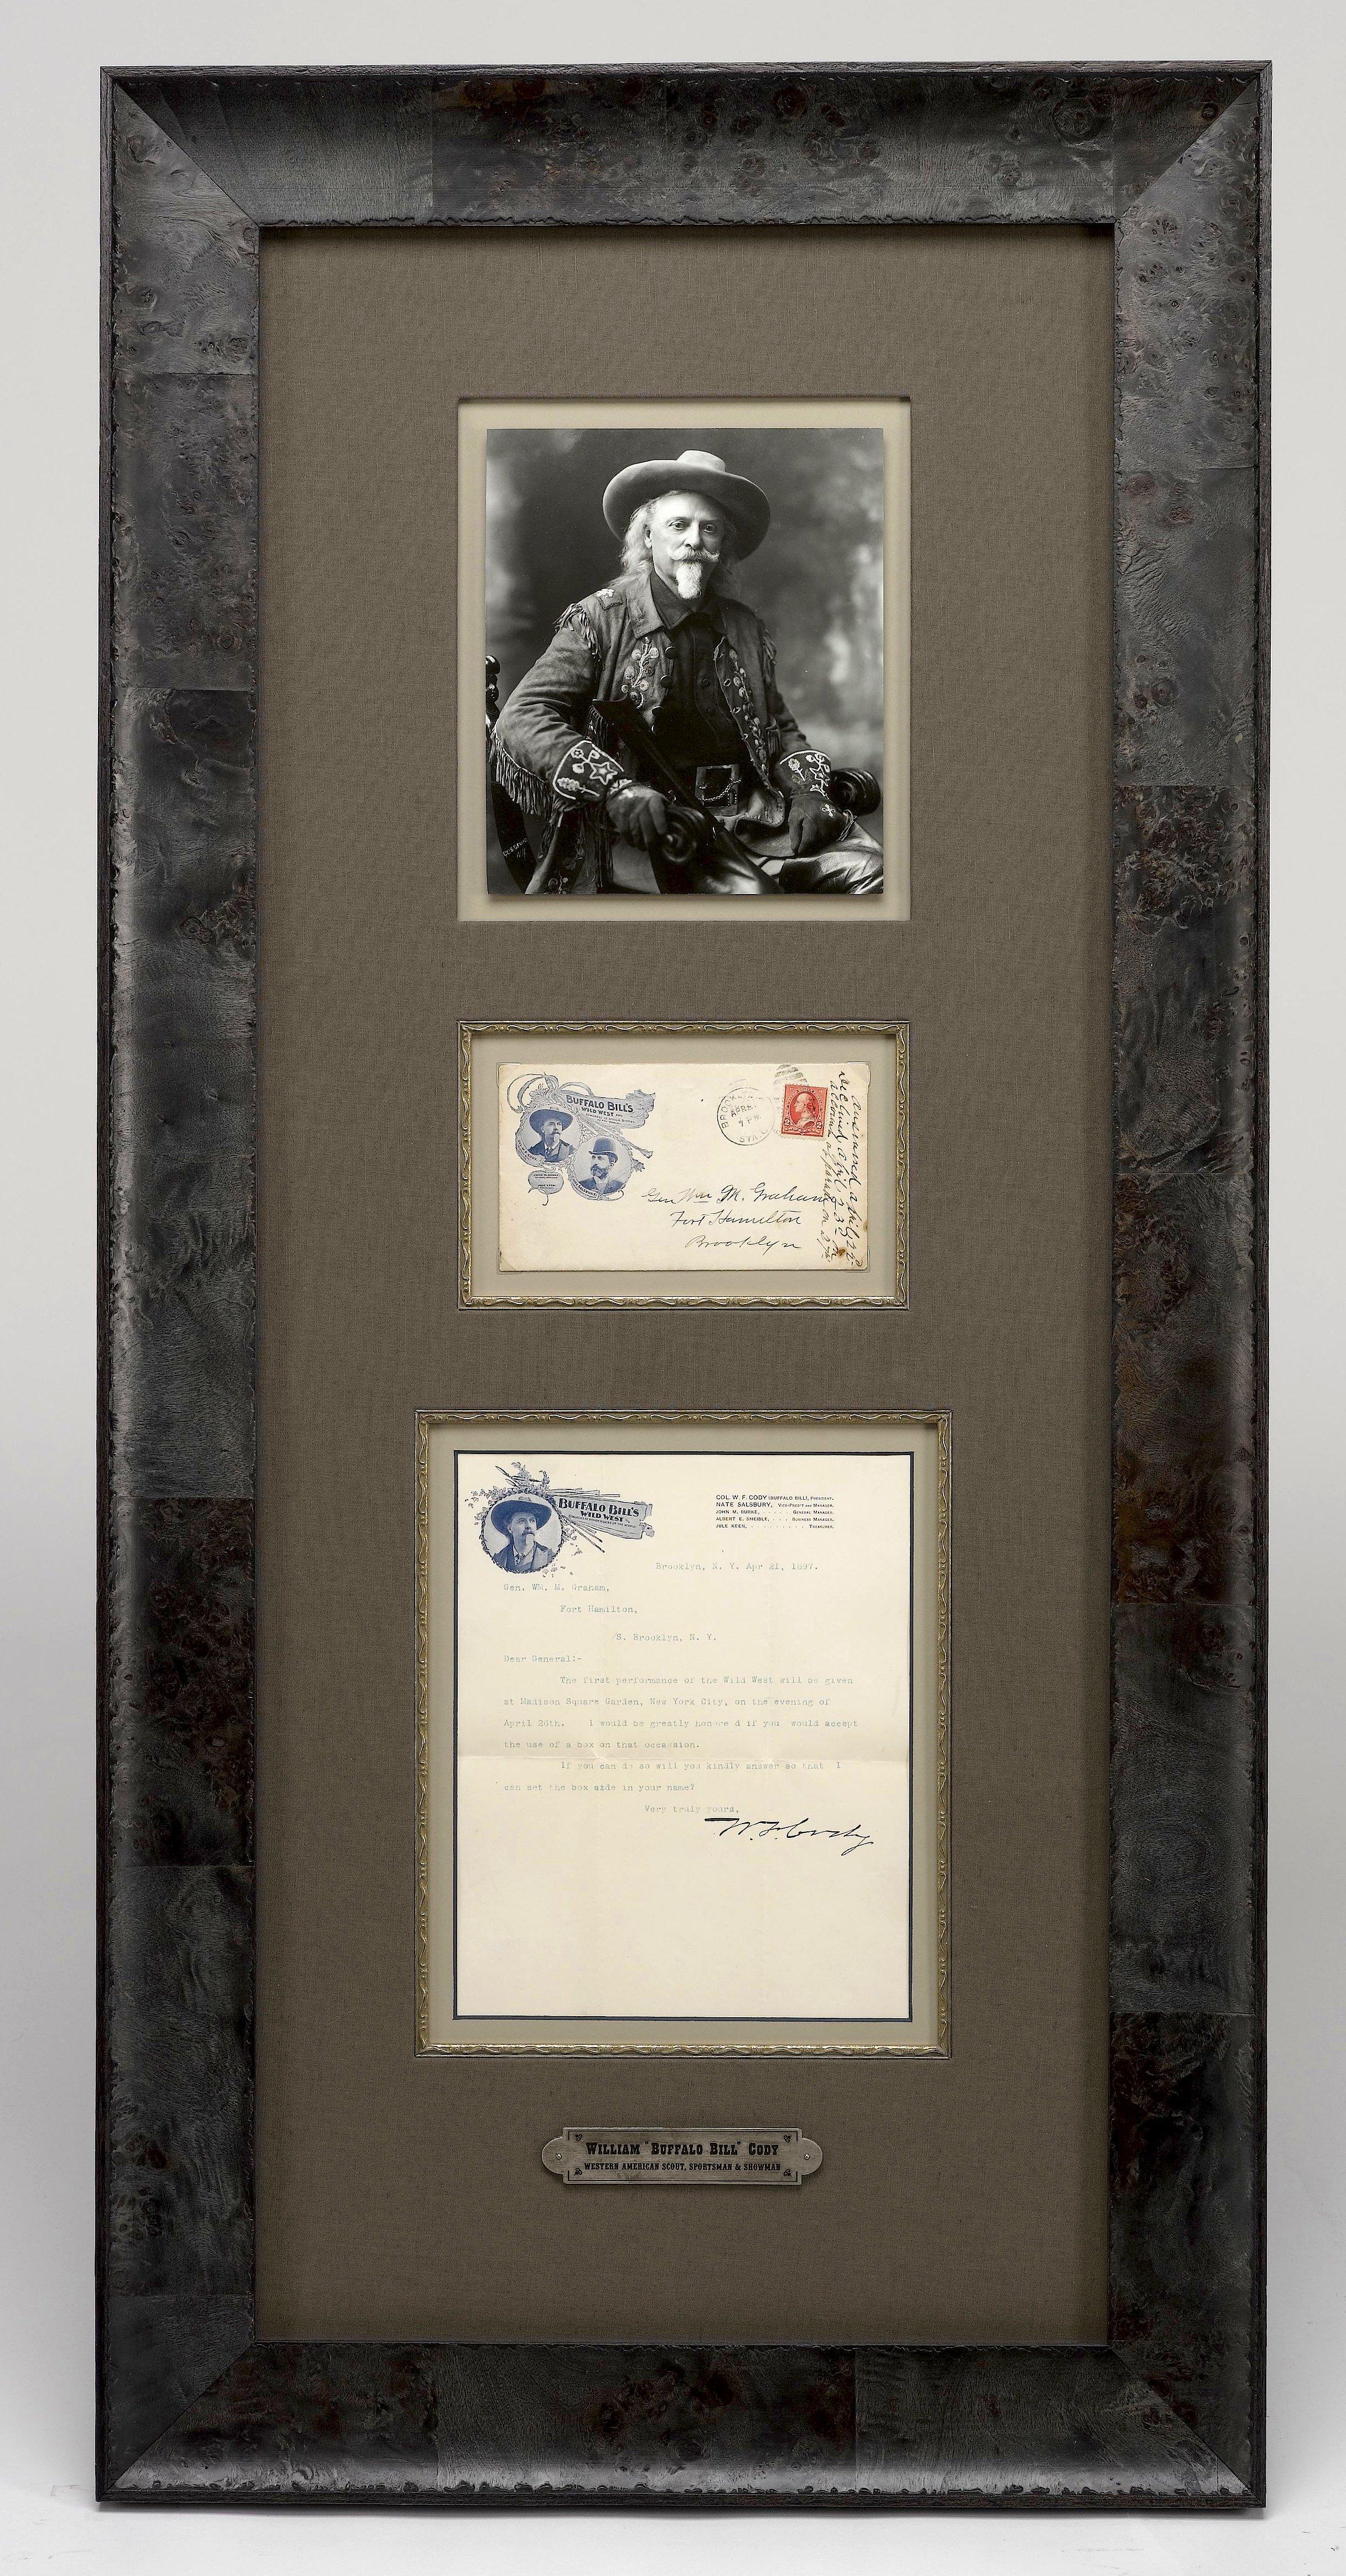 Presented is a unique autographed collage celebrating William F. “Buffalo Bill” Cody. The collage features an original typed letter signed by Cody and dated to April 21, 1897.

In the letter, Cody is writing to Gen. Wm. H. Graham at Fort Hamilton